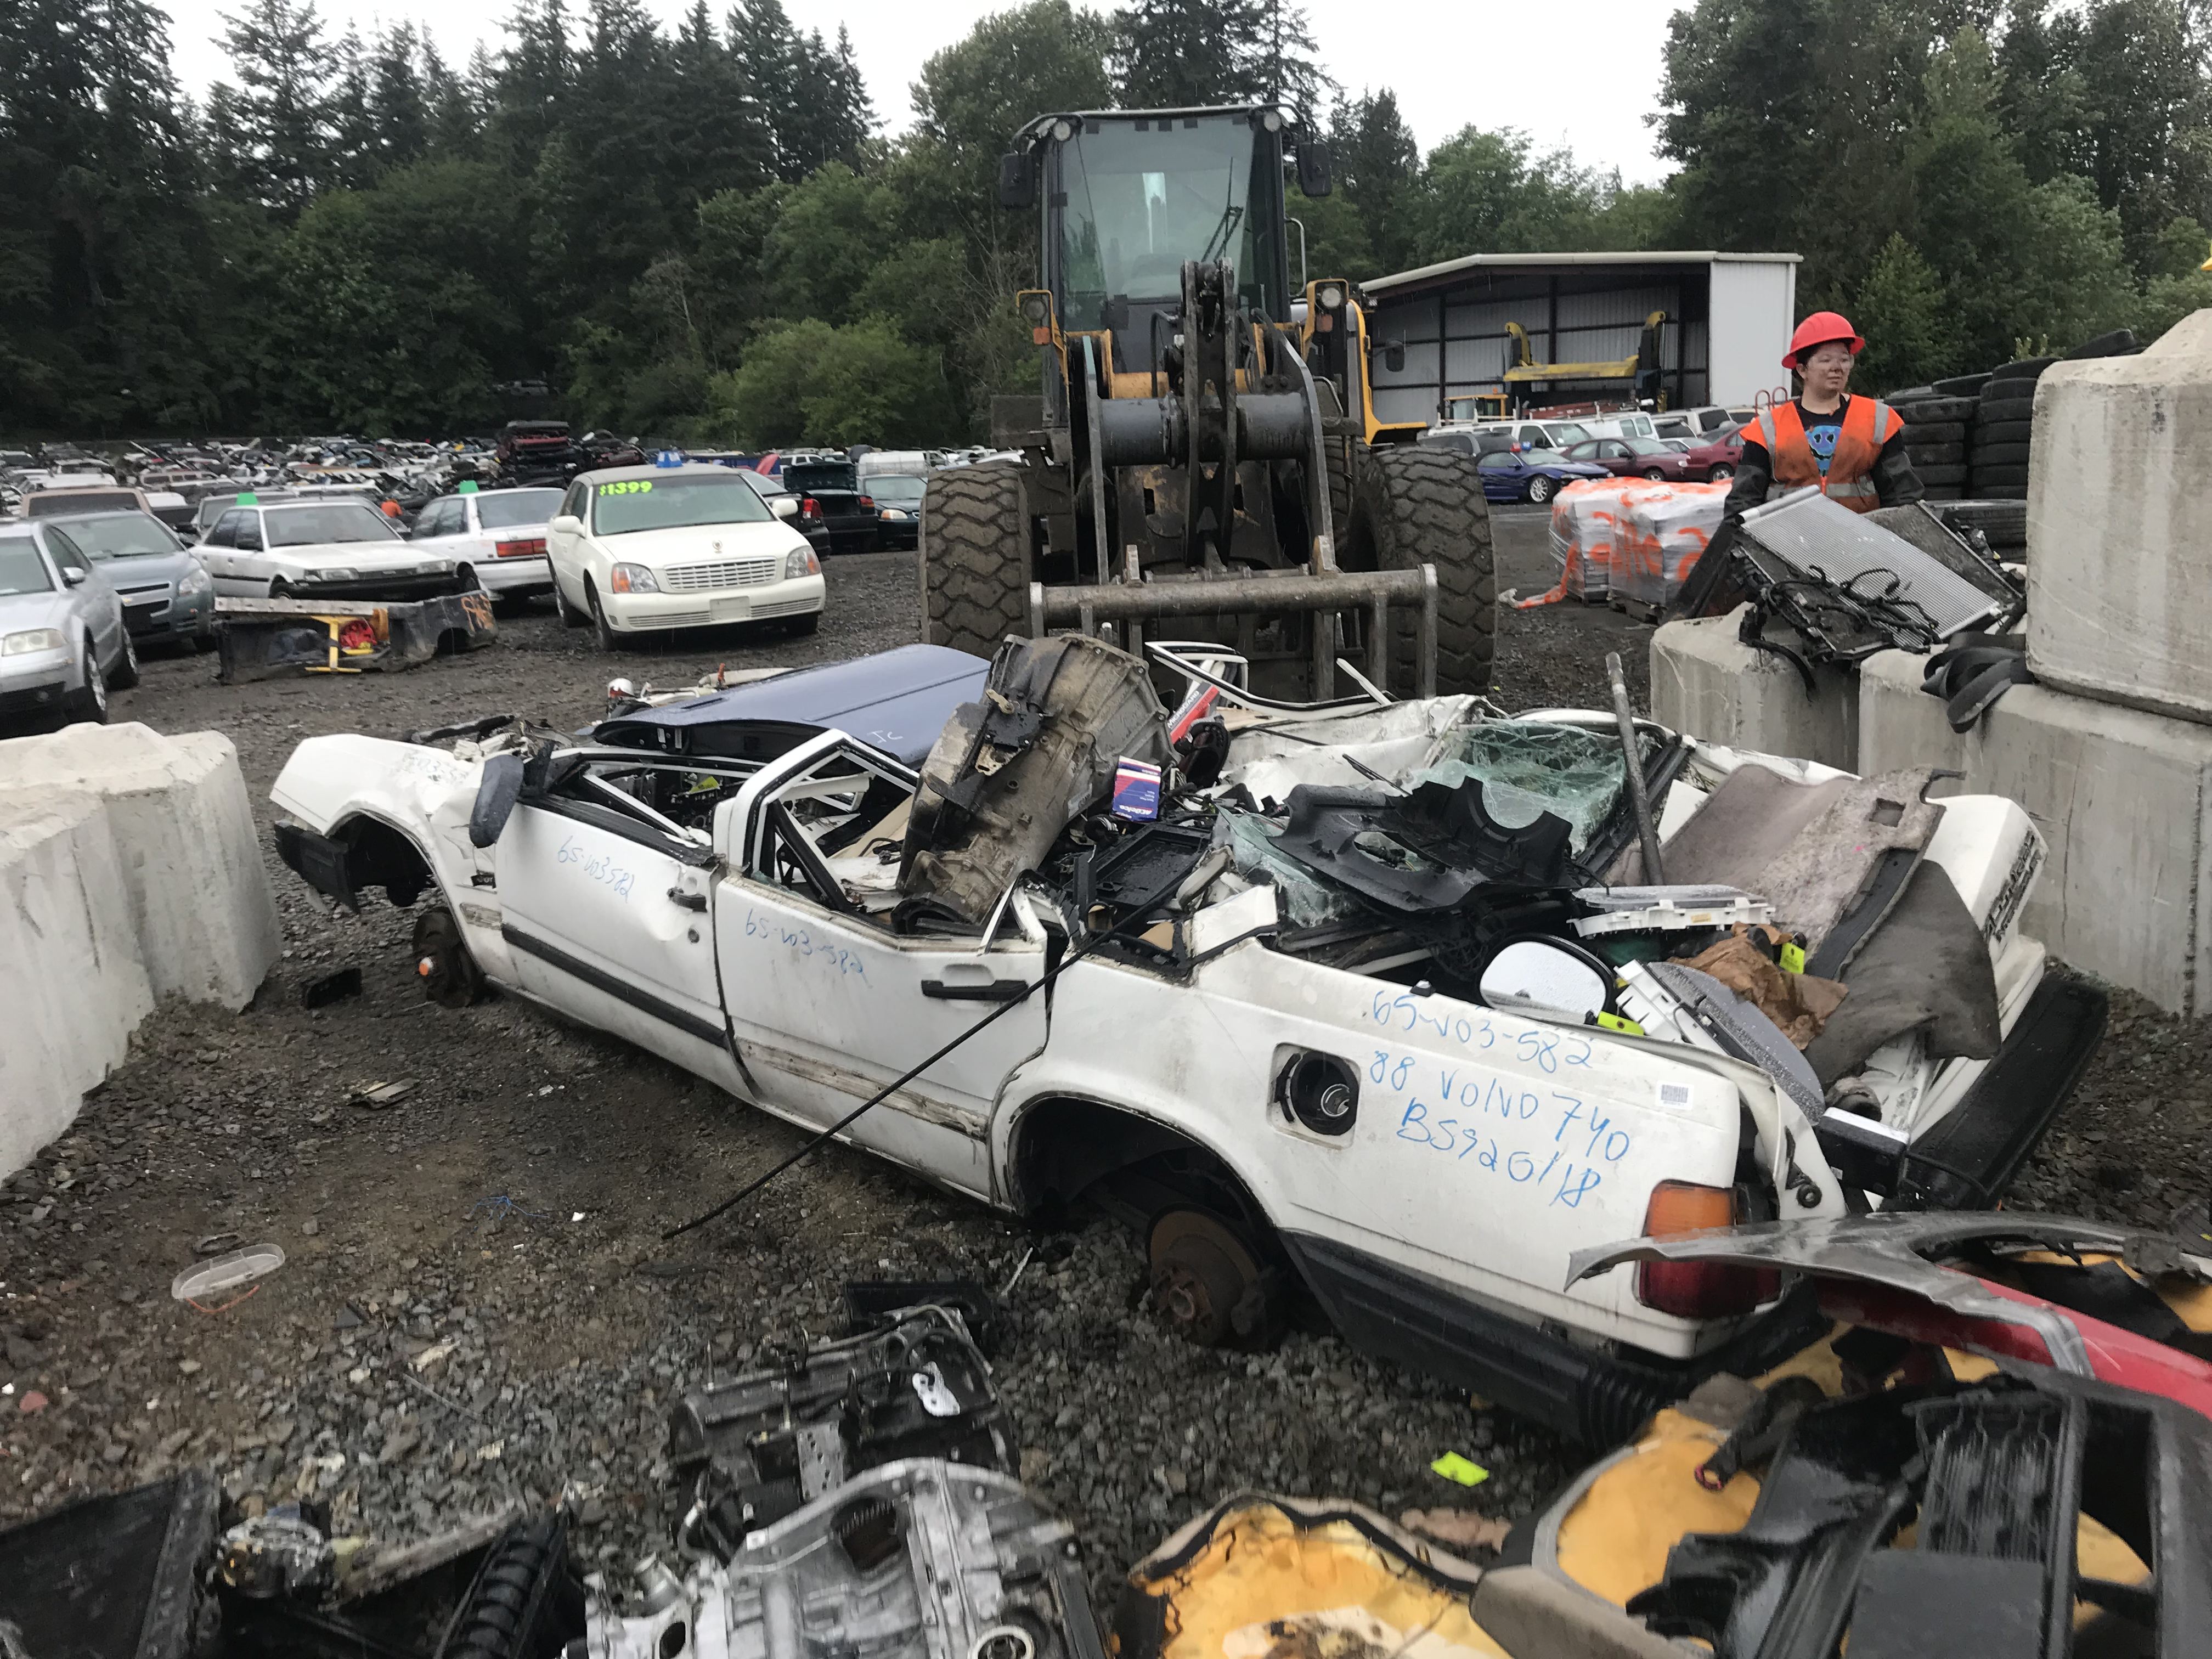 A crushed white car filled with trash in a junkyard